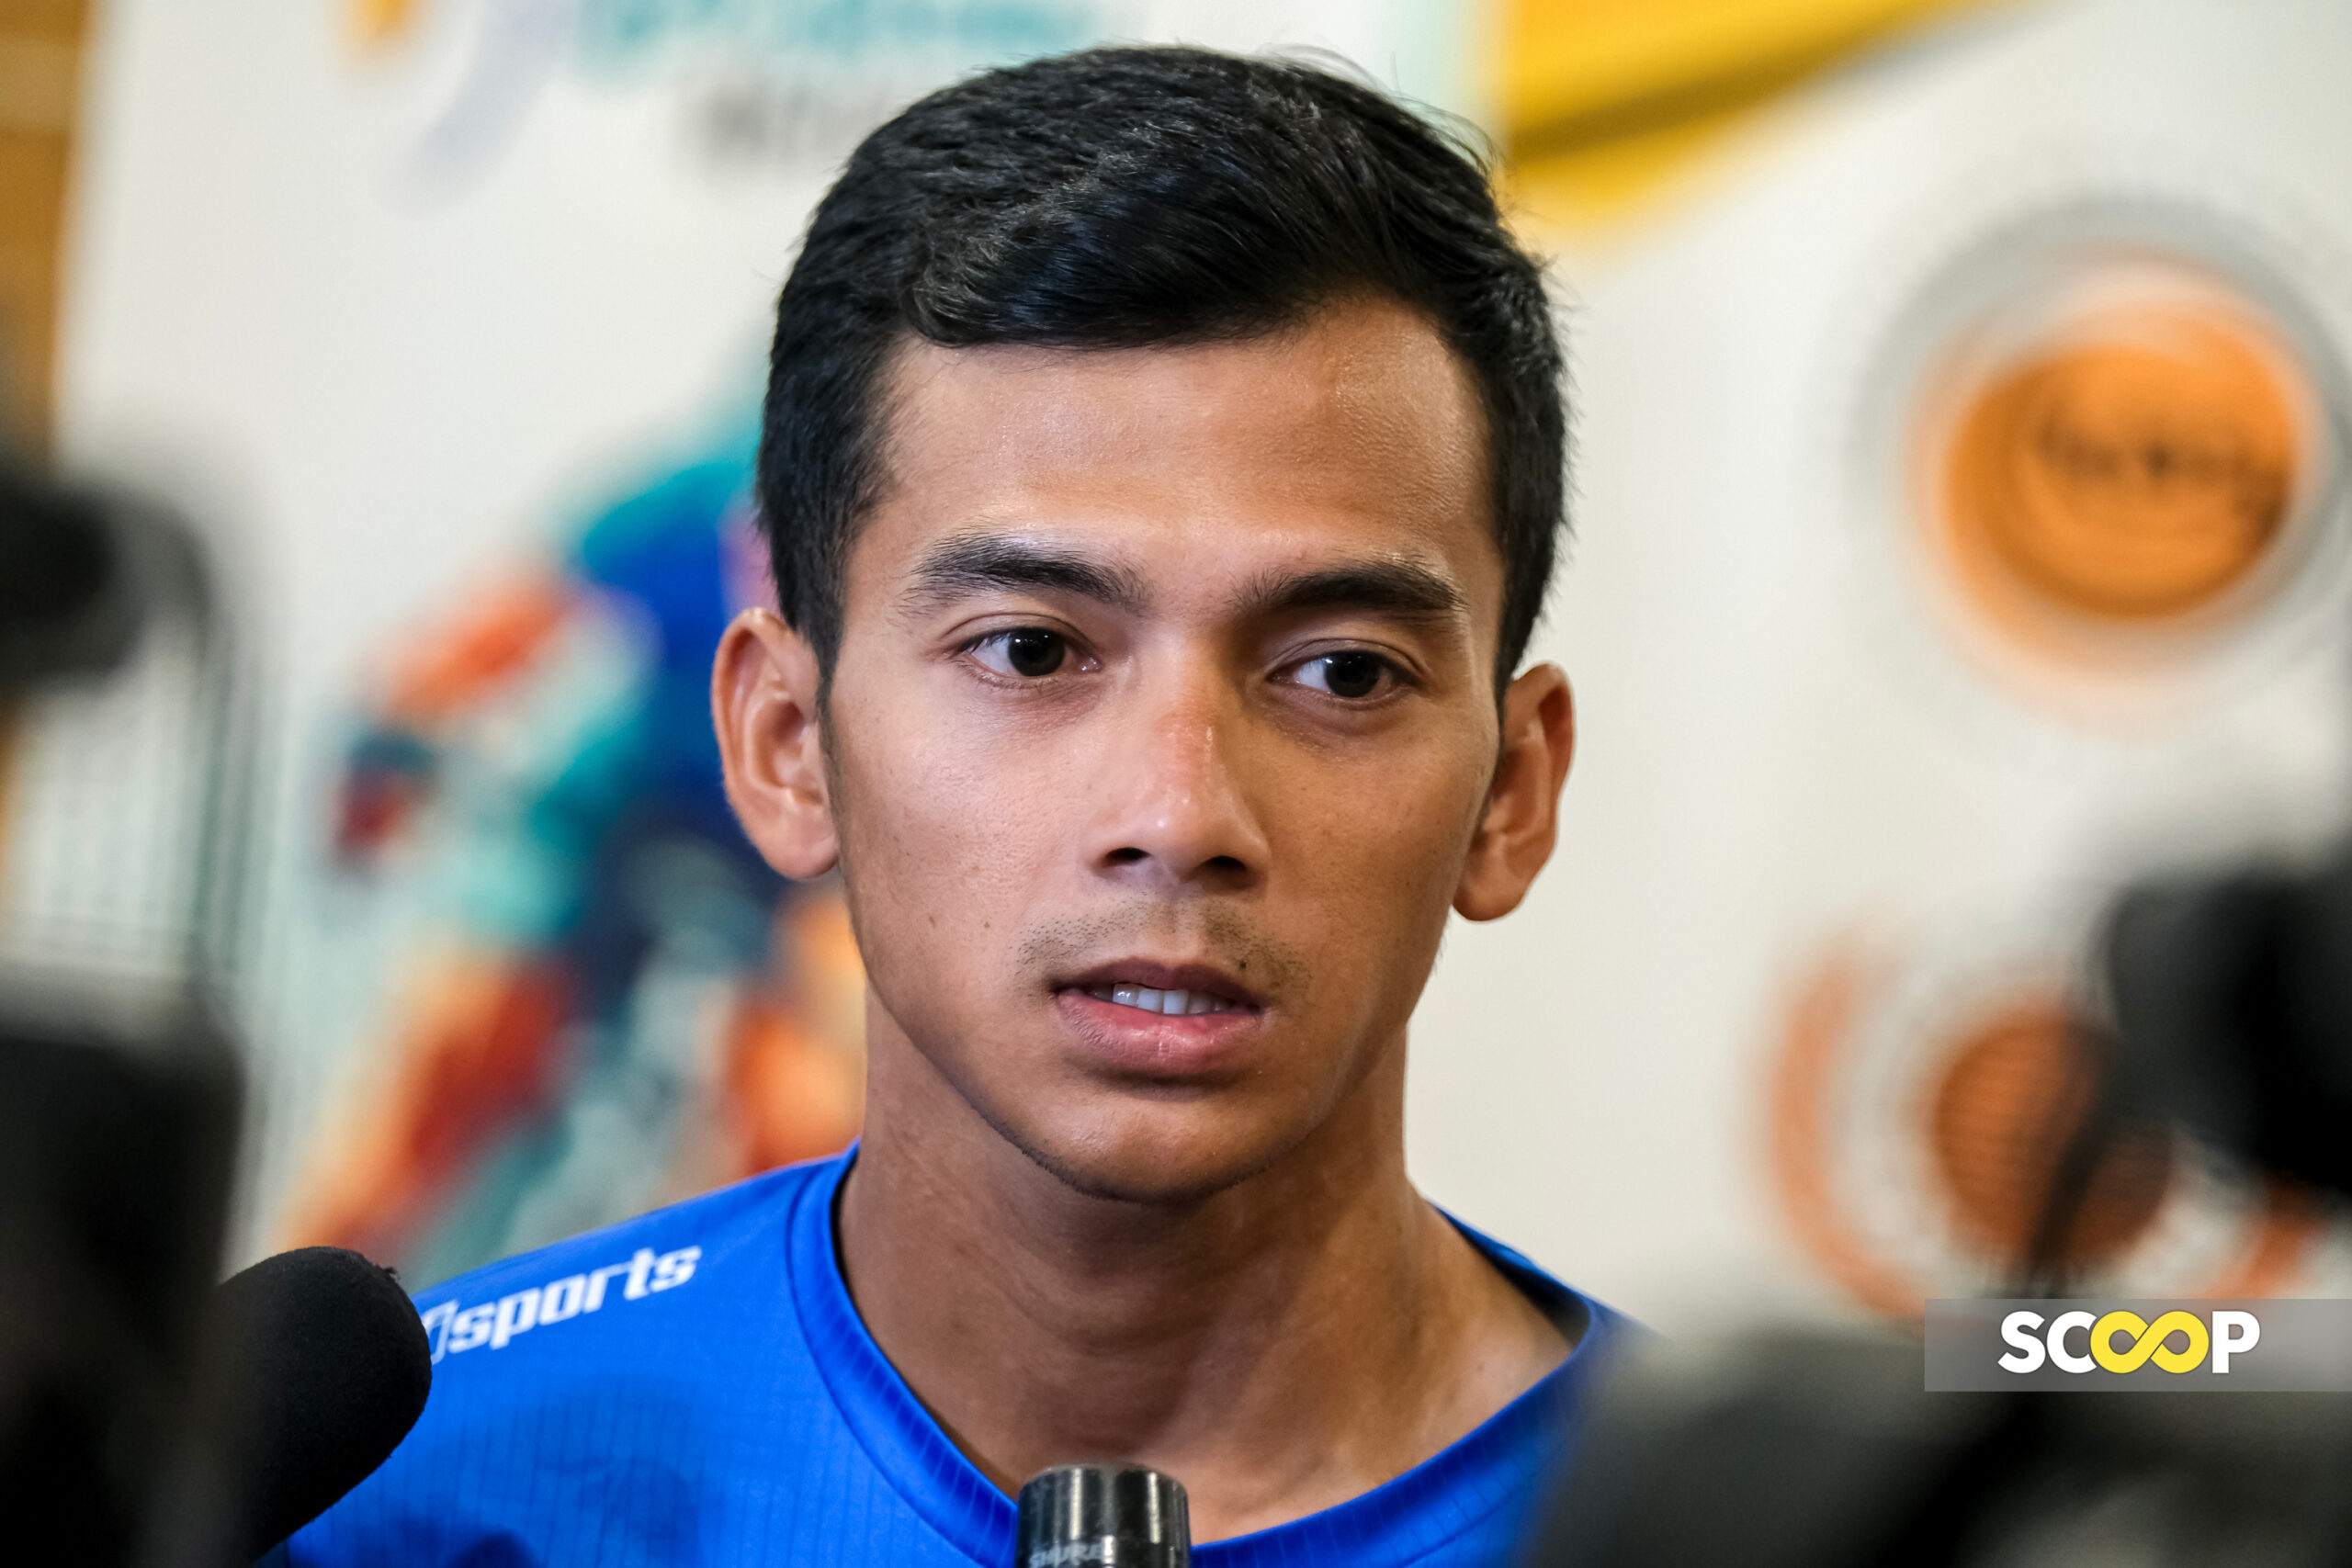 Zawawi a little disappointed, but grateful for second chance in road cycling